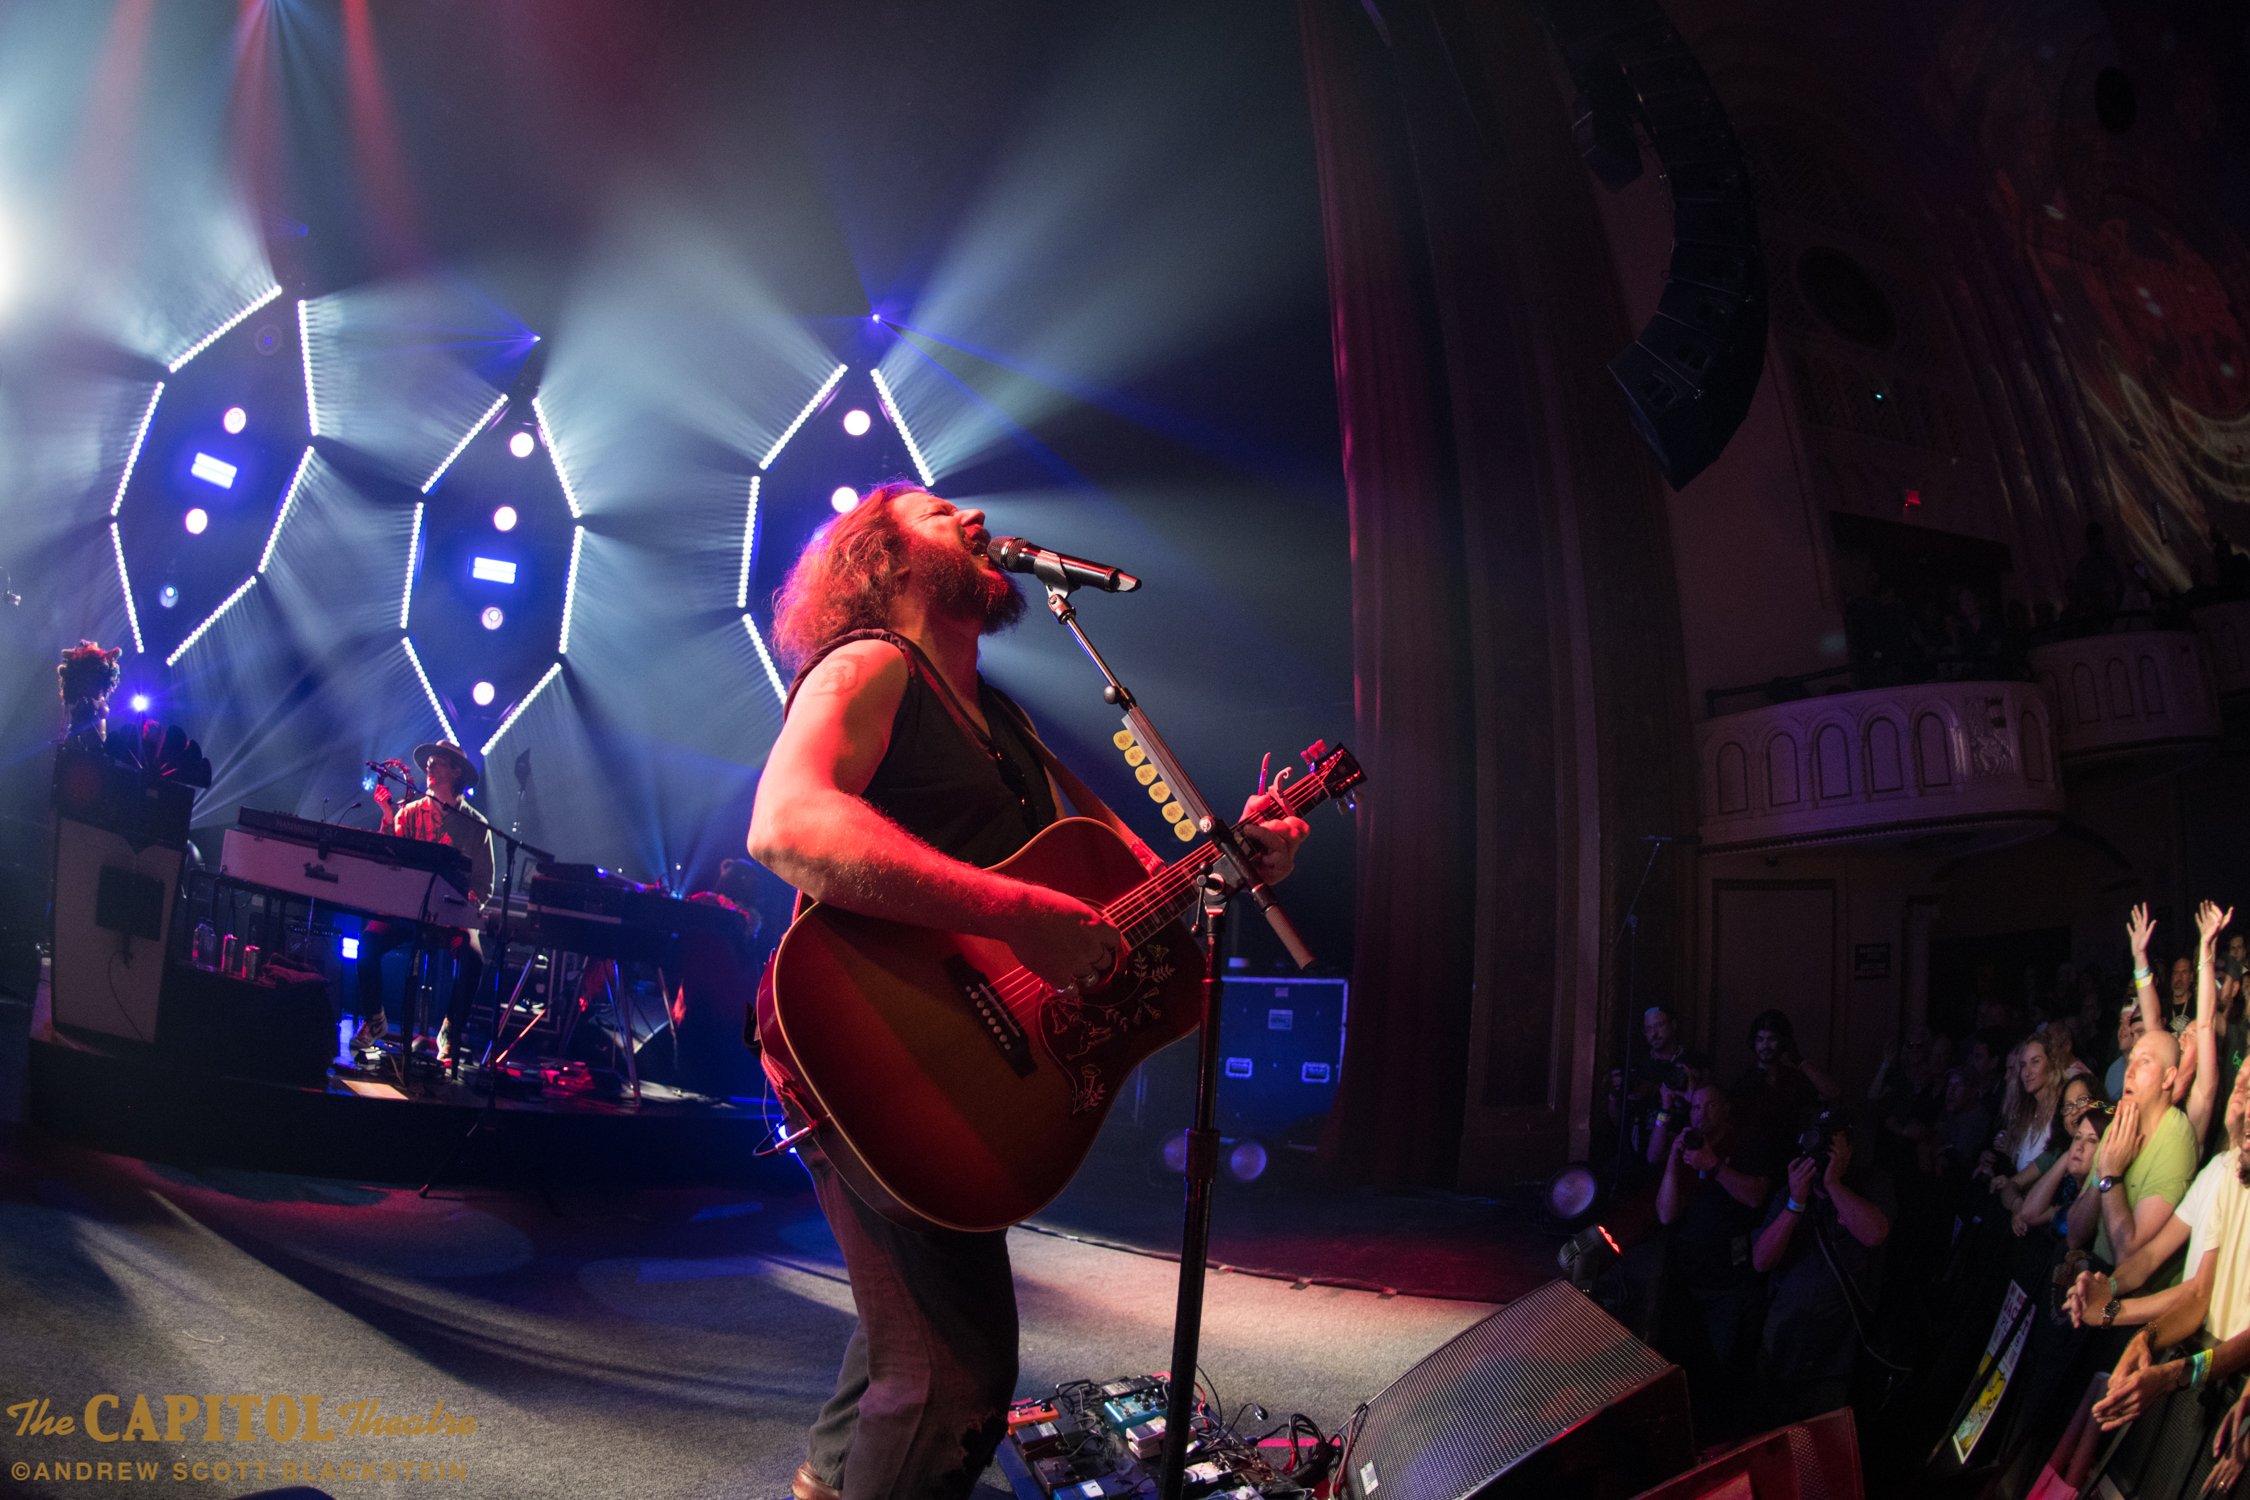 My Morning Jacket at The Capitol Theatre (A Gallery)